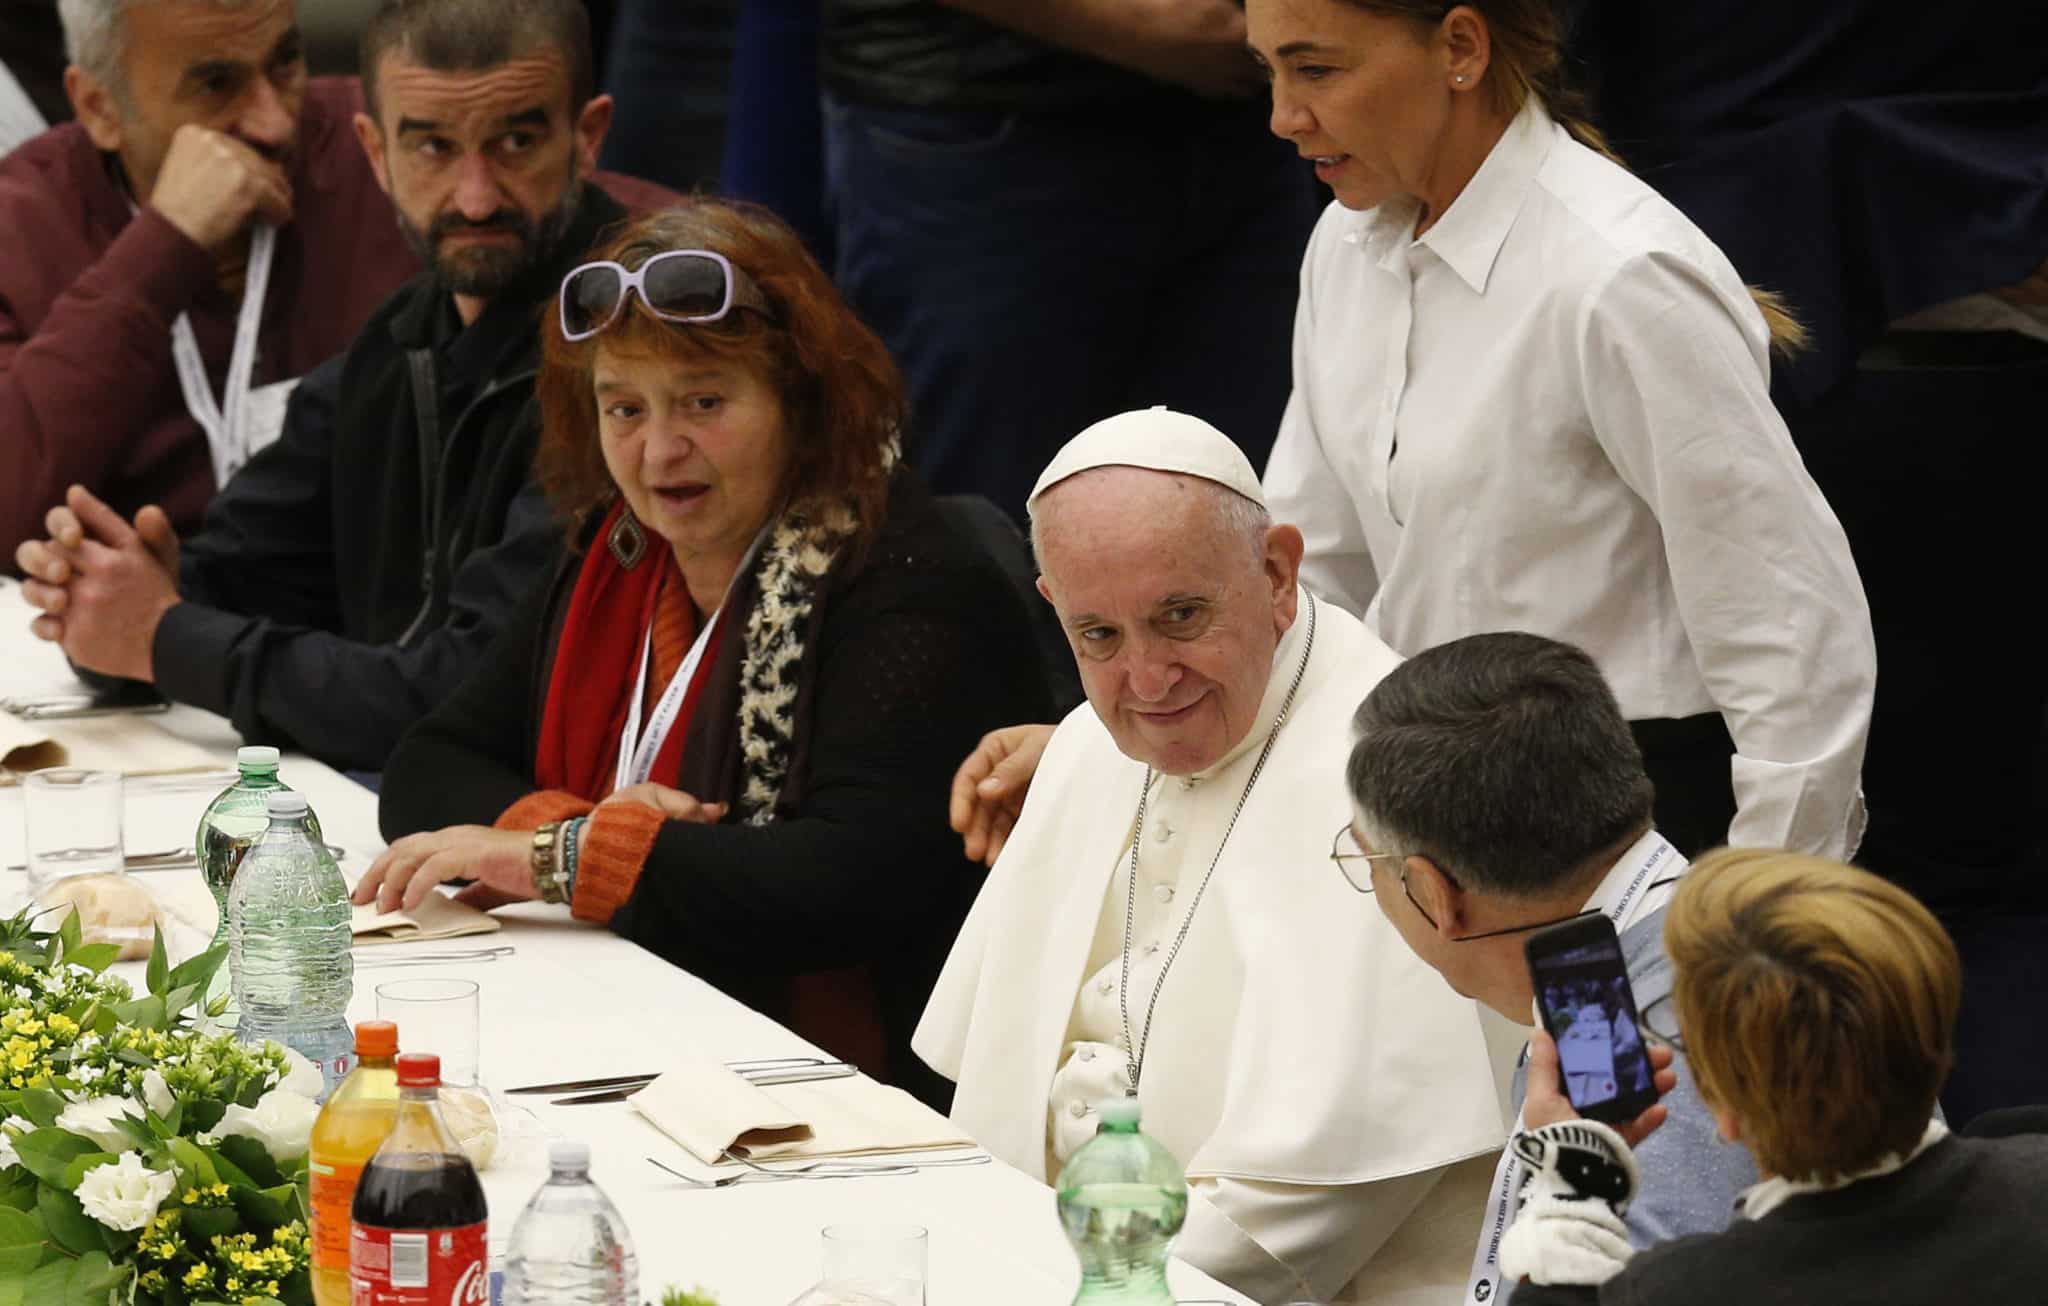 Helping the poor is not a papal fad, but a duty, pope says